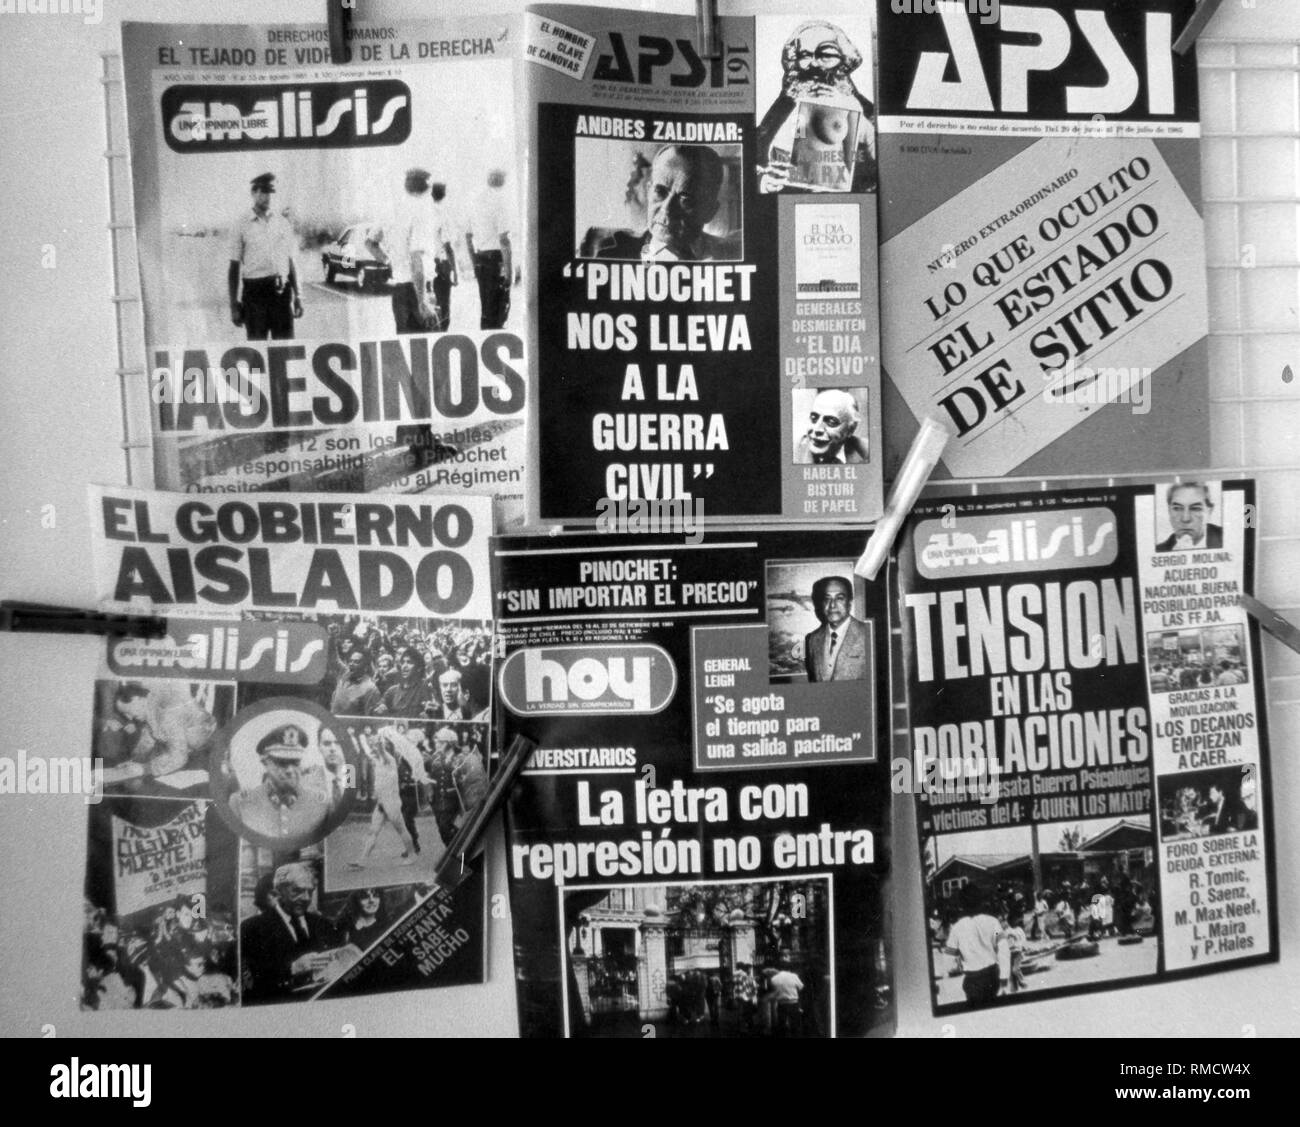 Political journals in Santiago de Chile: Zaldivar: 'Pinochet leads us into civil war', Analisis: 'Murderer' to the accused policemen' and 'El Gobierno Aislado' (the government is isolated). Stock Photo